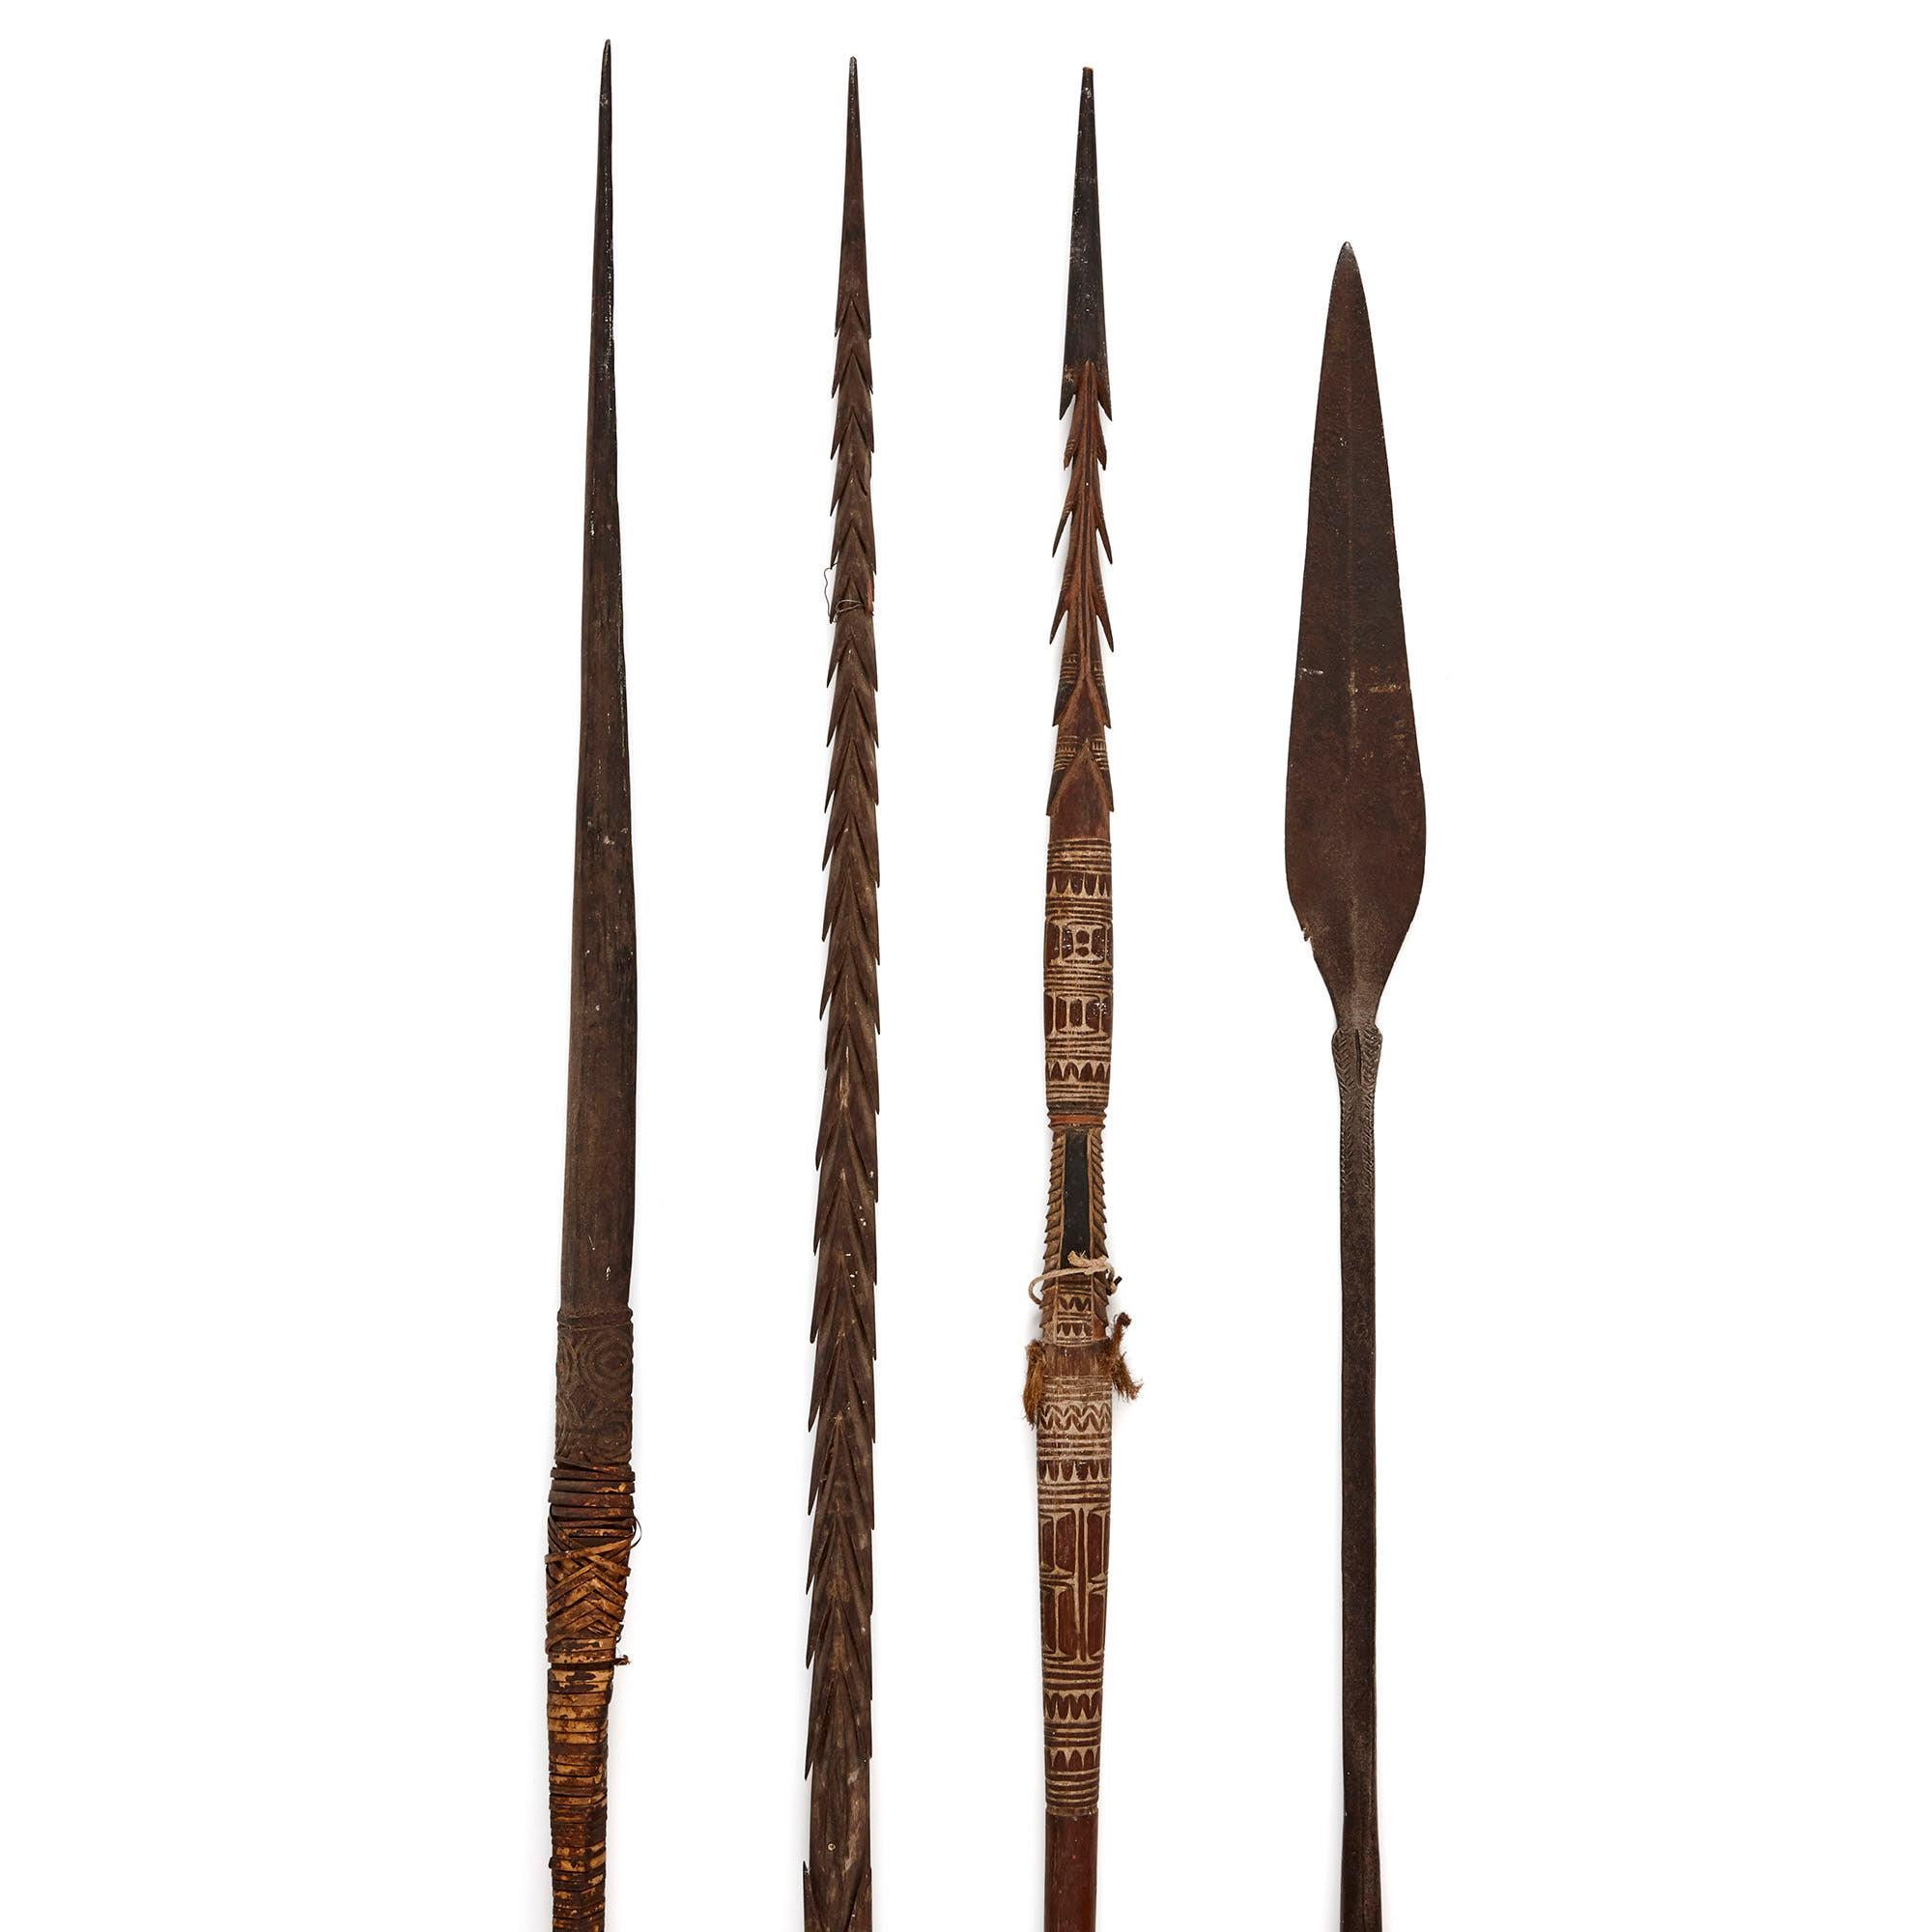 Four wooden and iron hunting spears from Africa
African, early 20th century
Measures: Largest height 275cm, diameter 3.5cm
Smallest: Height 173cm, width 5.5cm, depth 2cm

This eclectic group contains four antique African hunting spears, each